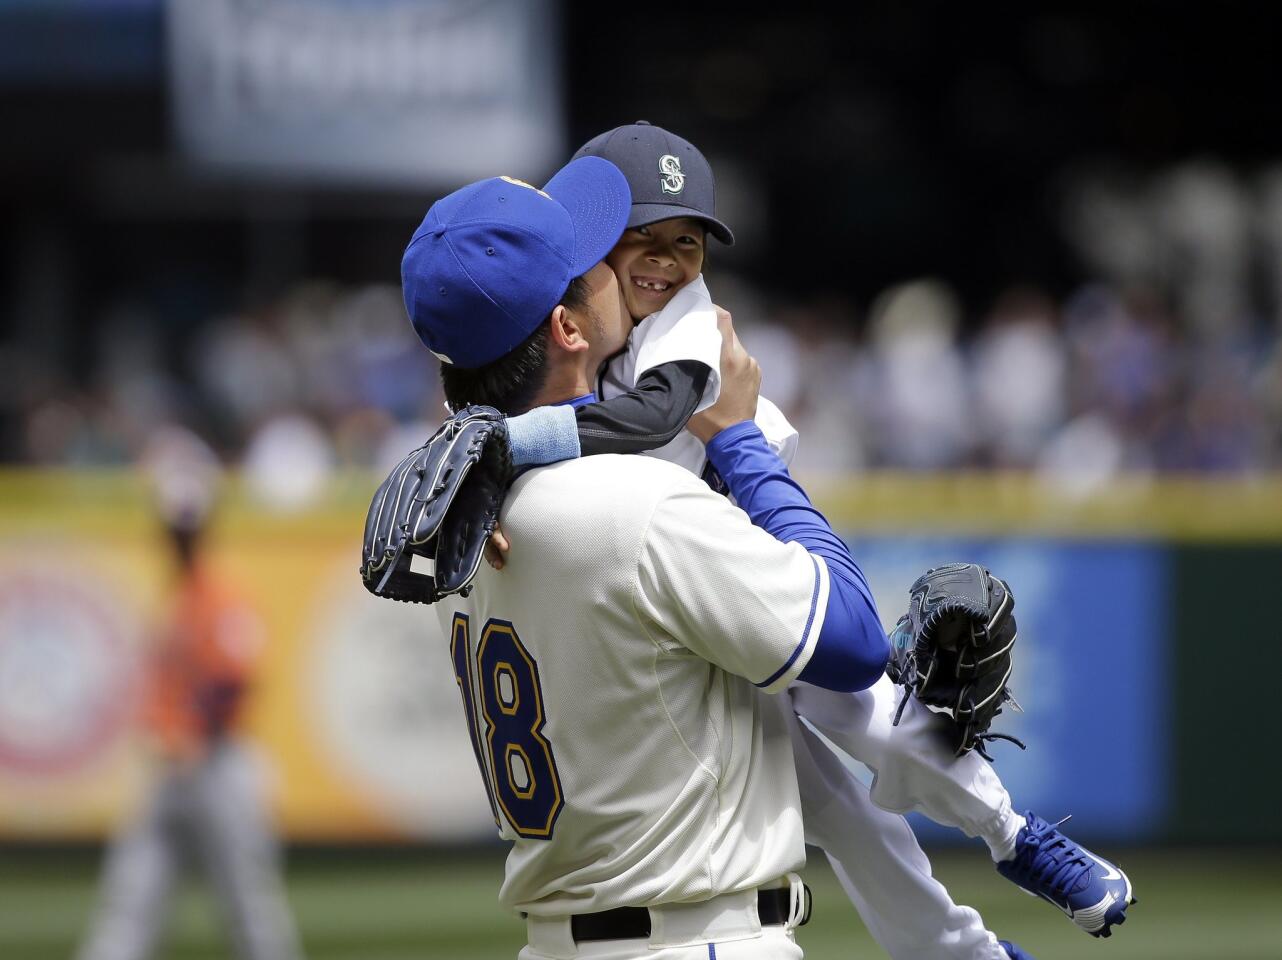 Seattle Mariners' Hisashi Iwakuma gives a kiss to his son Towa after the child was among several players' children throwing out the ceremonial first pitch on Father's Day before a baseball game against the Houston Astros, Sunday, June 21, 2015, in Seattle. (AP Photo/Elaine Thompson)